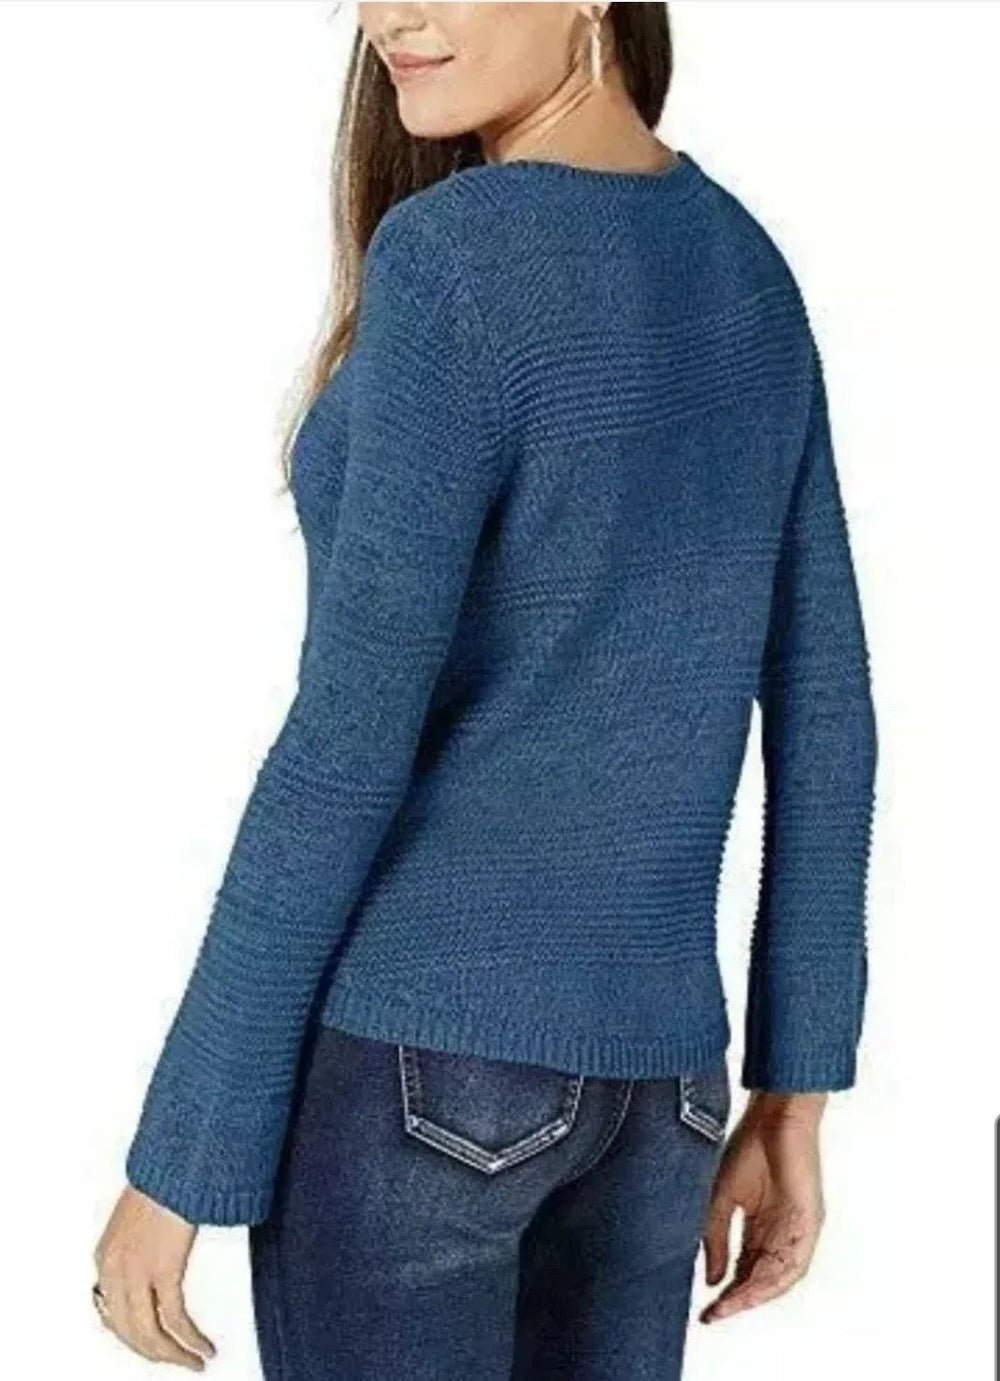 NWT Style & Co. Mixed-Stitch Crew-Neck Sweater Blue Size S - BELLEZA'S - NWT Style & Co. Mixed-Stitch Crew-Neck Sweater Blue Size S - BELLEZA'S - Sweater -